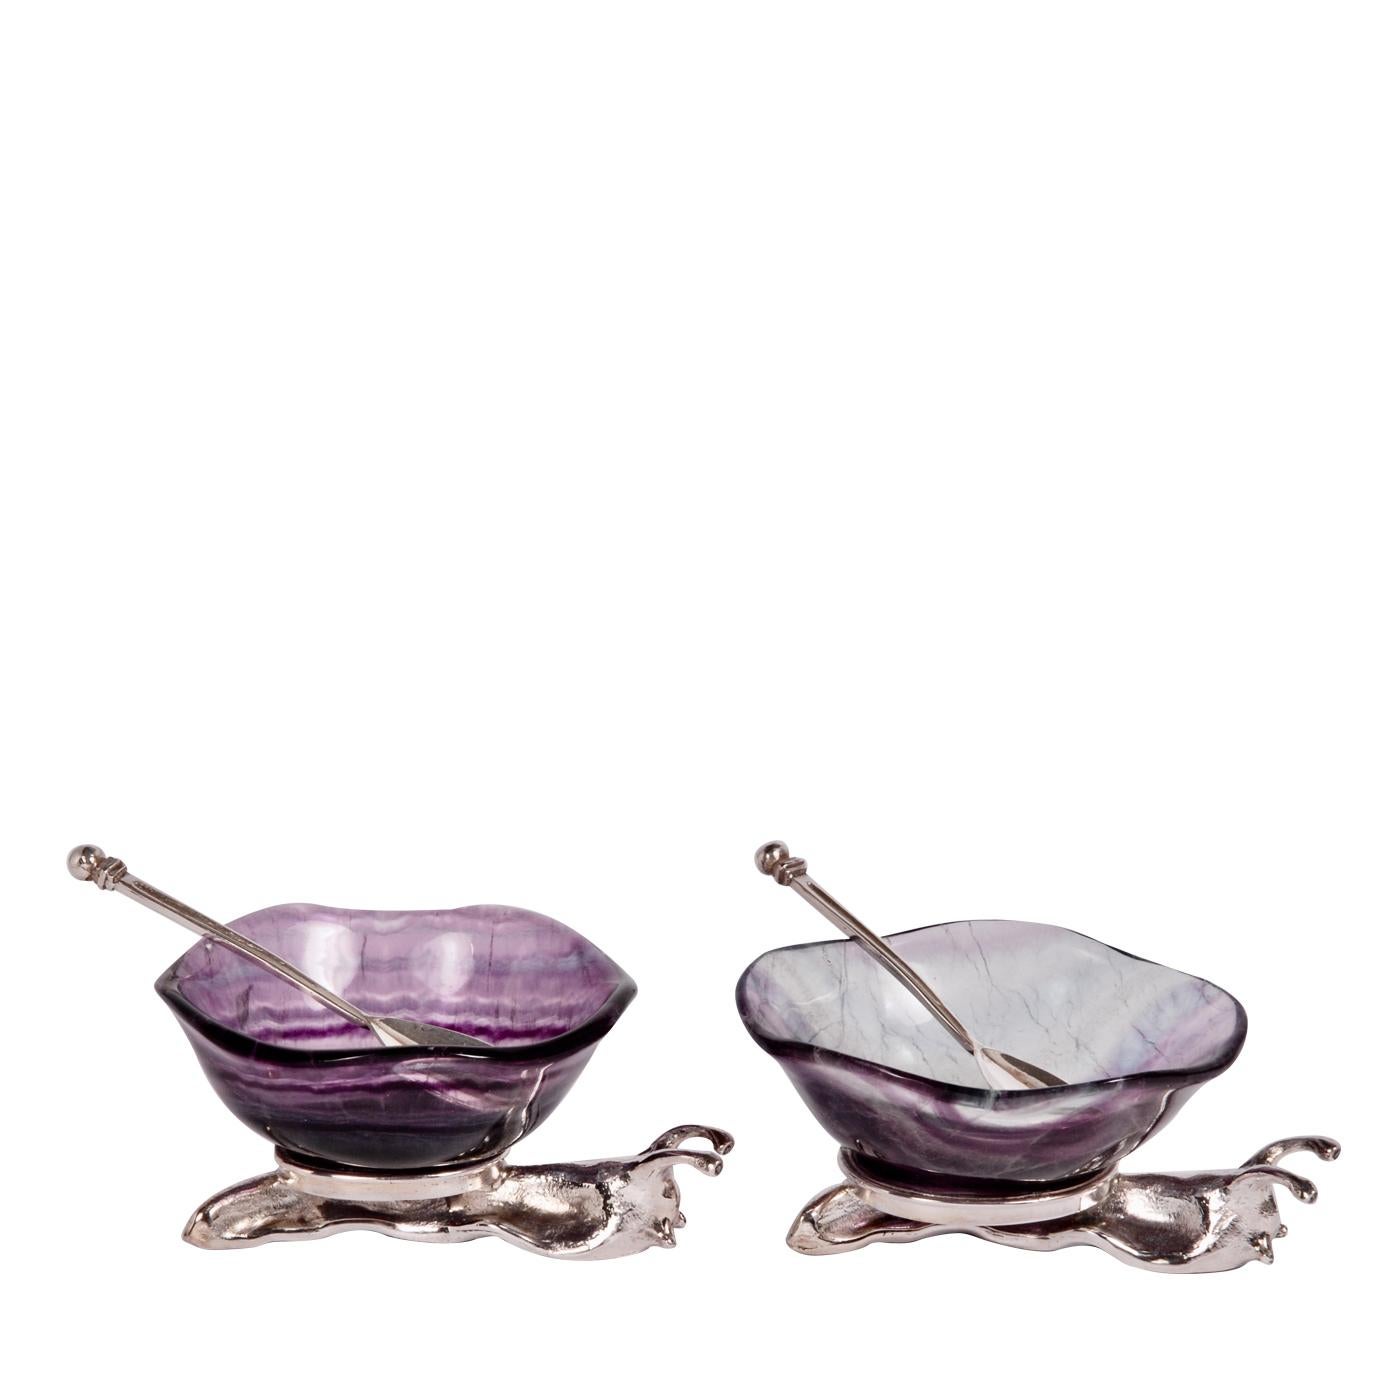 This eccentric set of salt and pepper cellars will bring an accent of unmistakable originality to any kitchen decor. Customizable in several shades, the two bowls in fluorite with irregular edges rest each on a snail-shaped base crafted of sterling